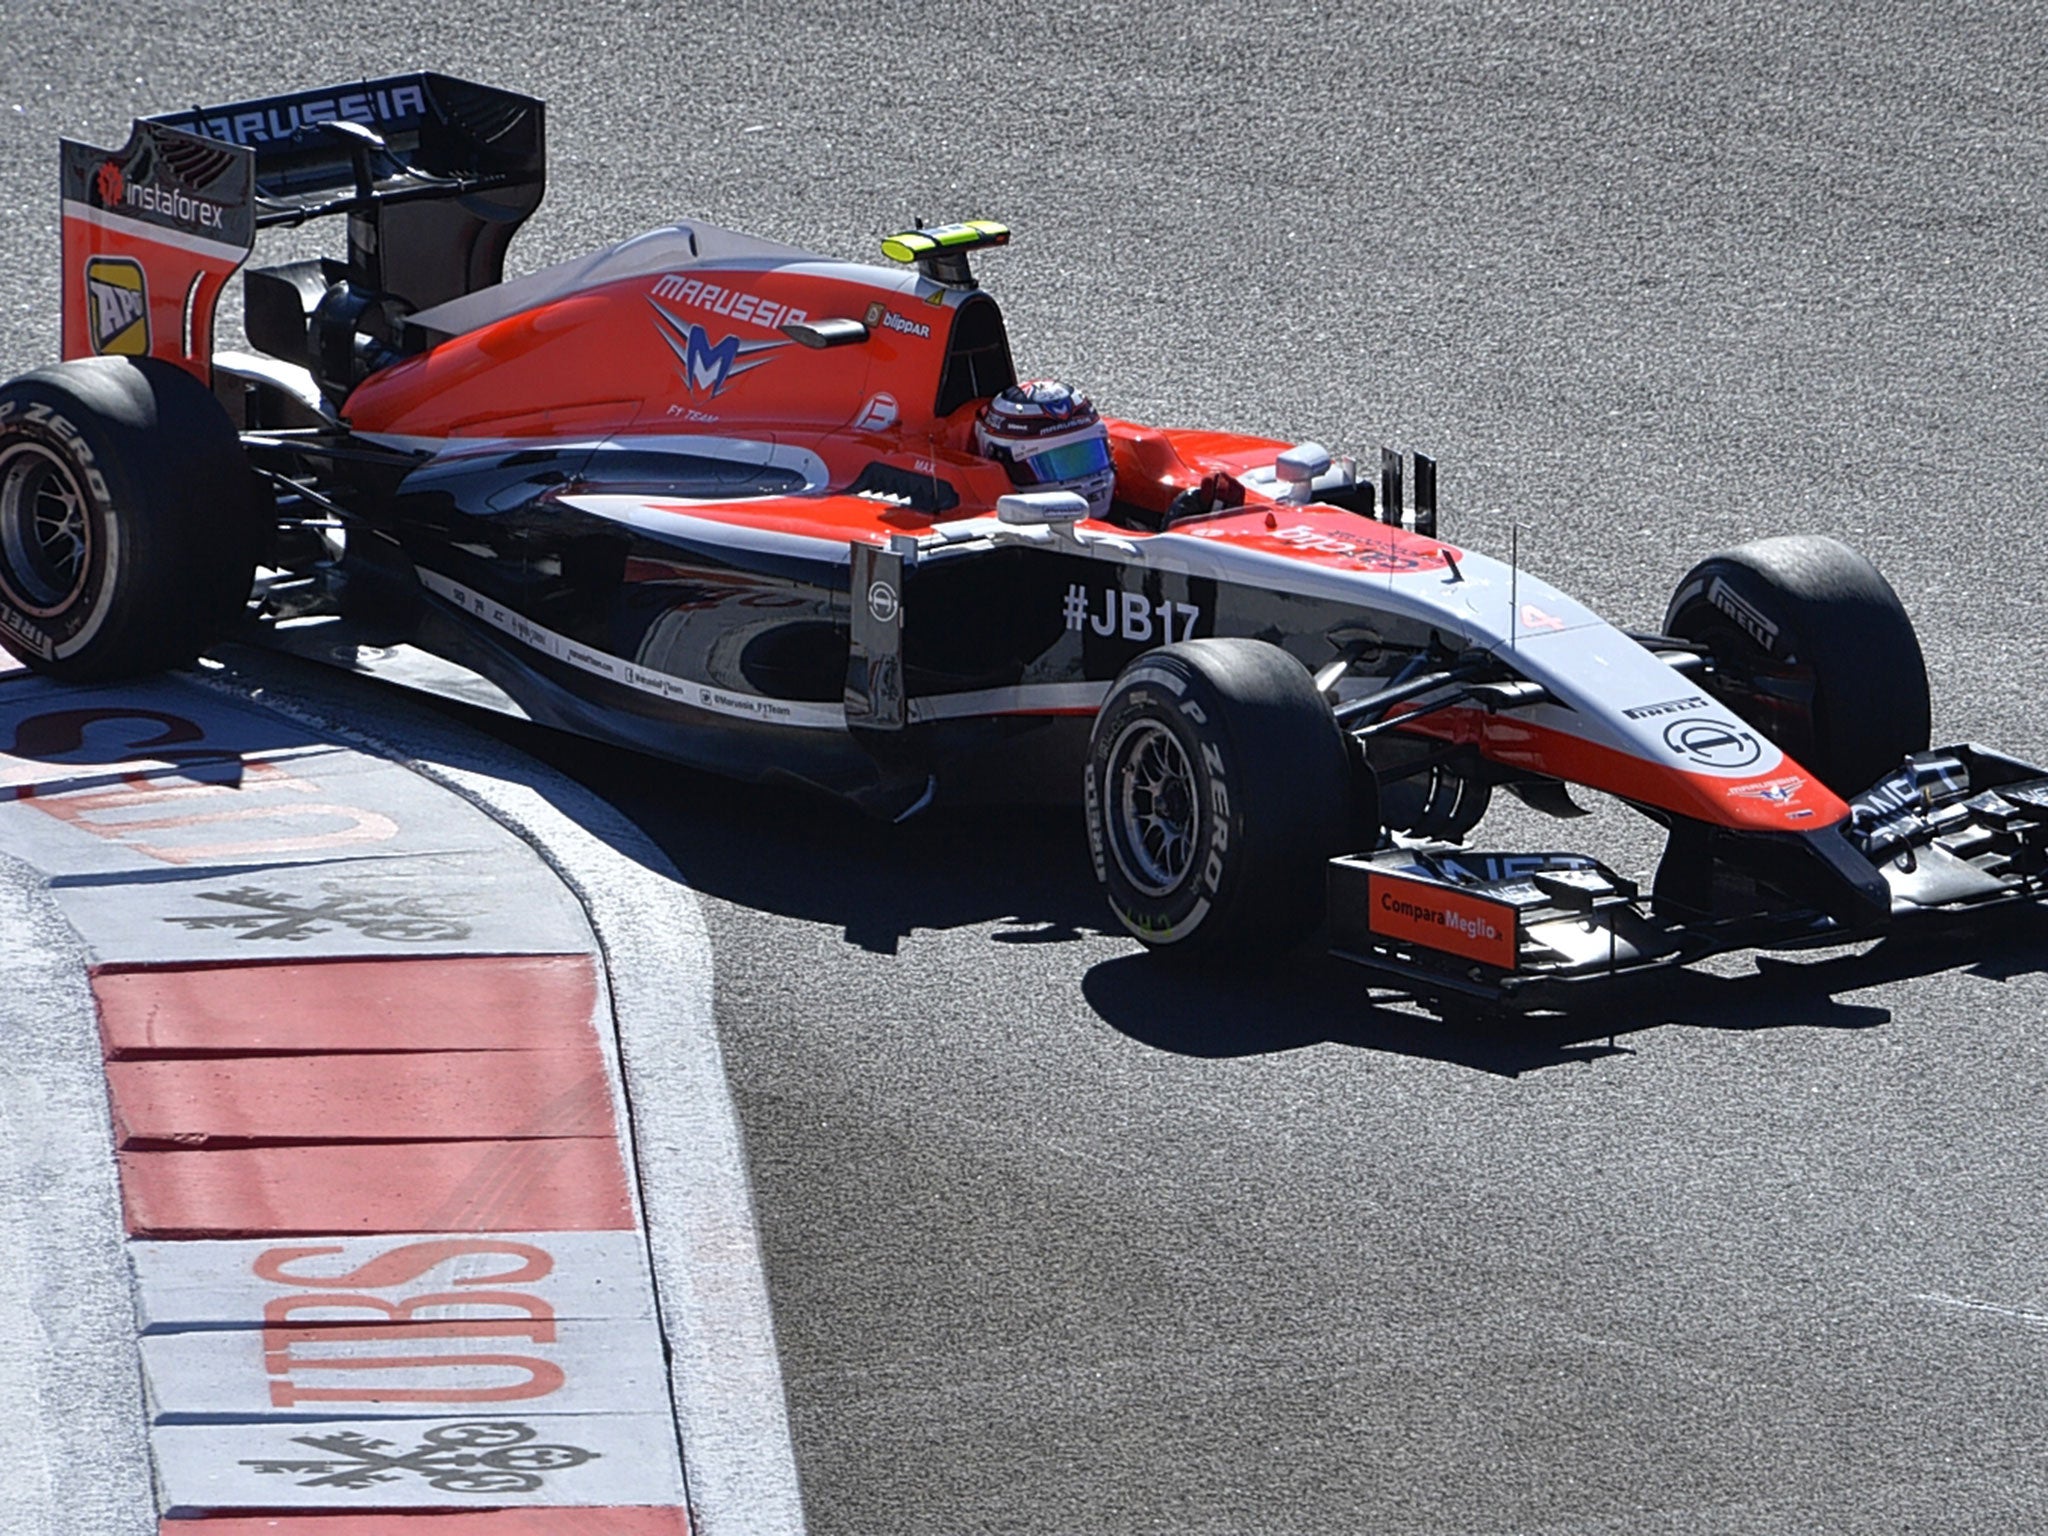 Marussia wanted to compete this season using last year’s car